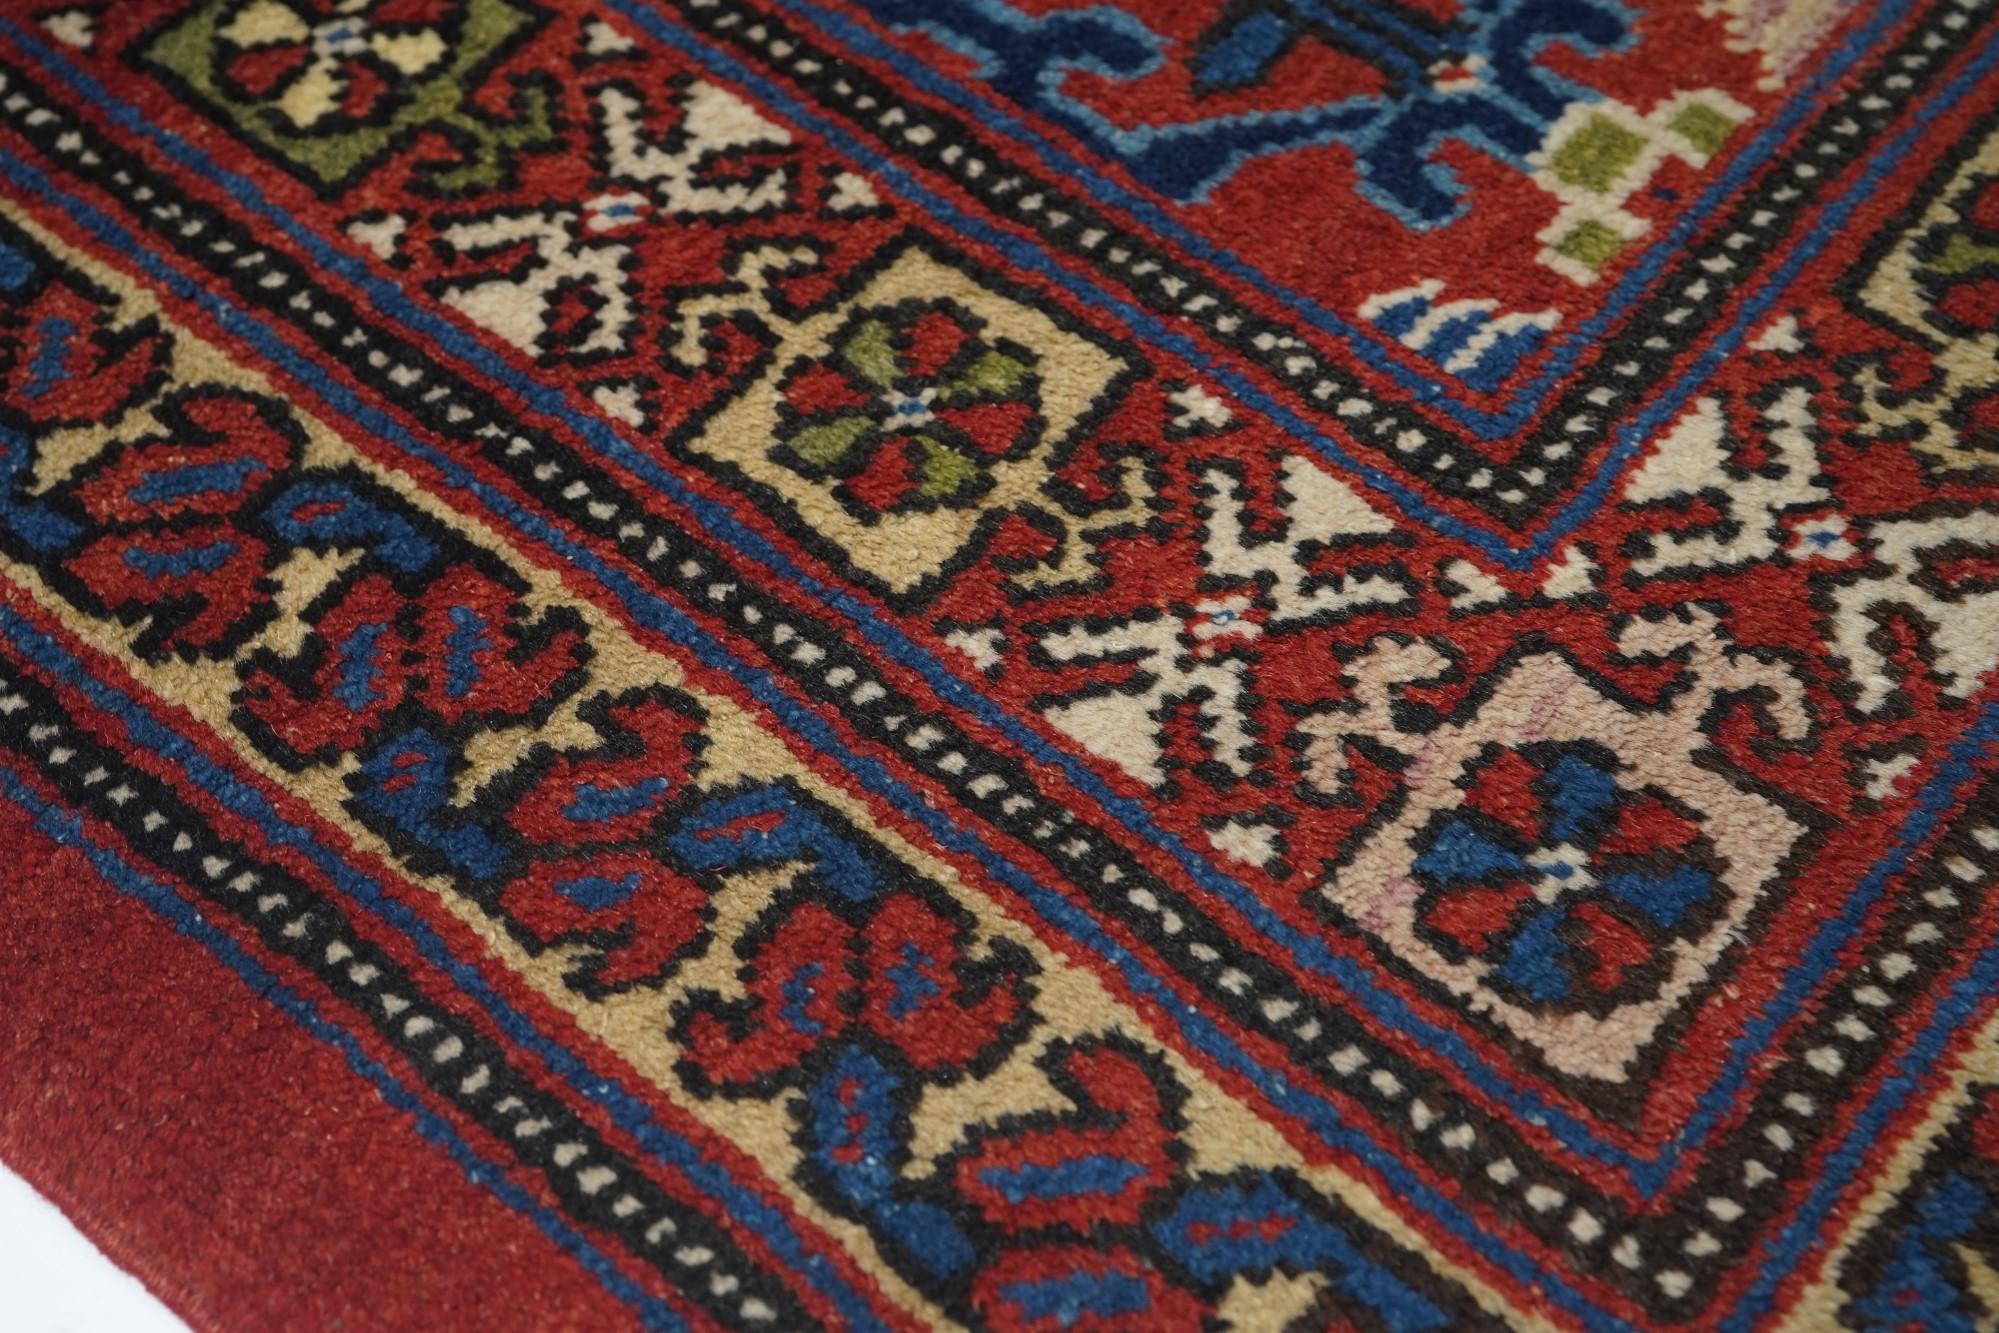 Antique Khotan Samarghand Rug In Excellent Condition For Sale In New York, NY